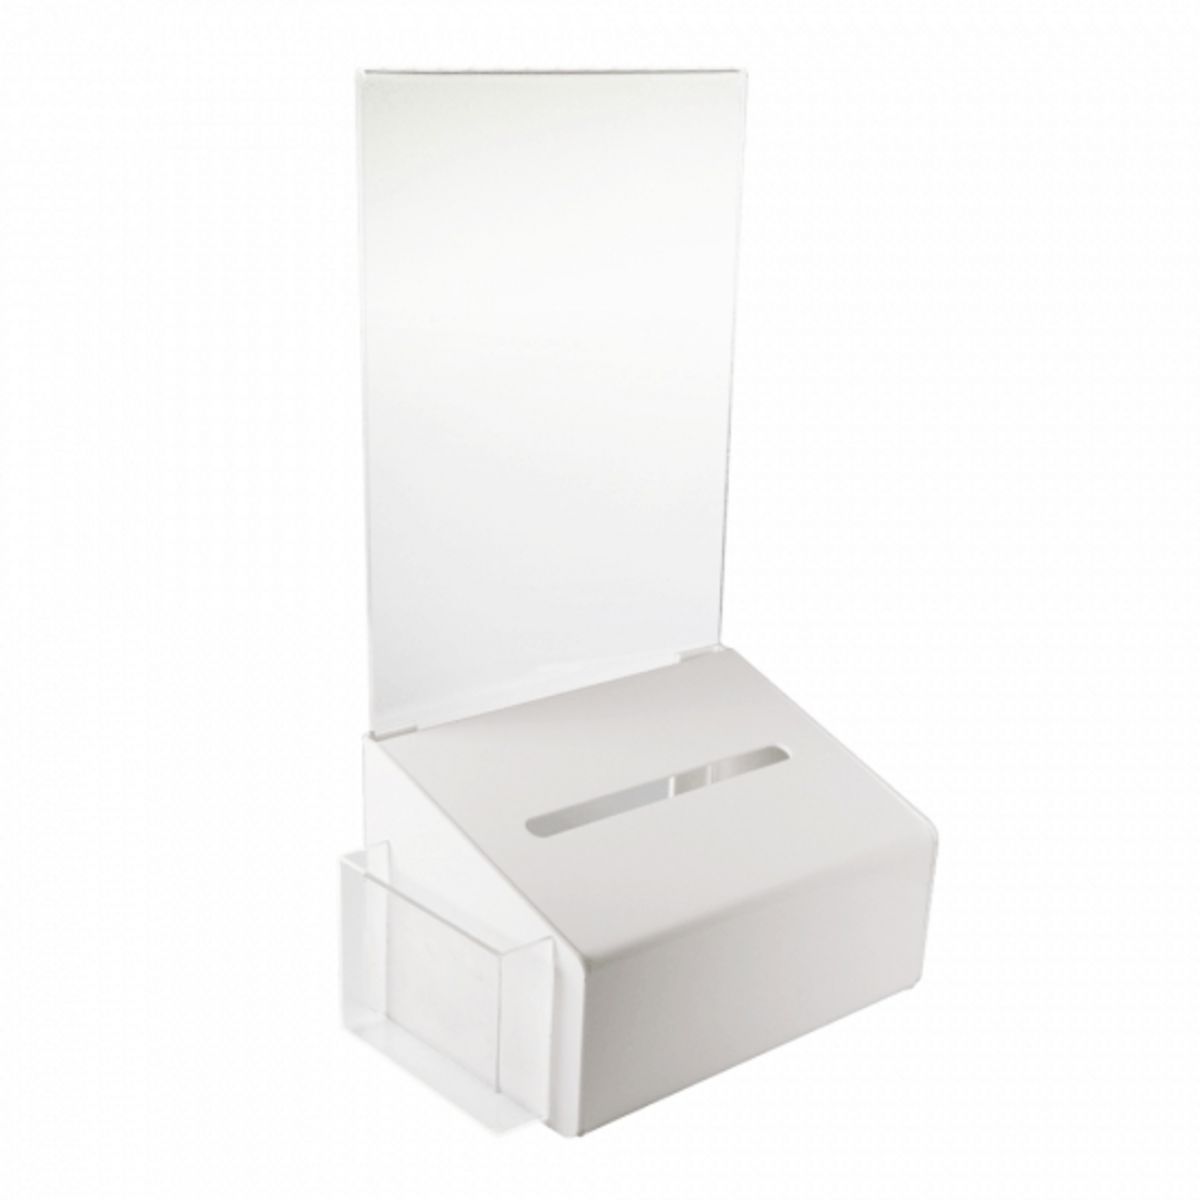 White Acrylic Suggestion Box With Header Display Poster .1.png